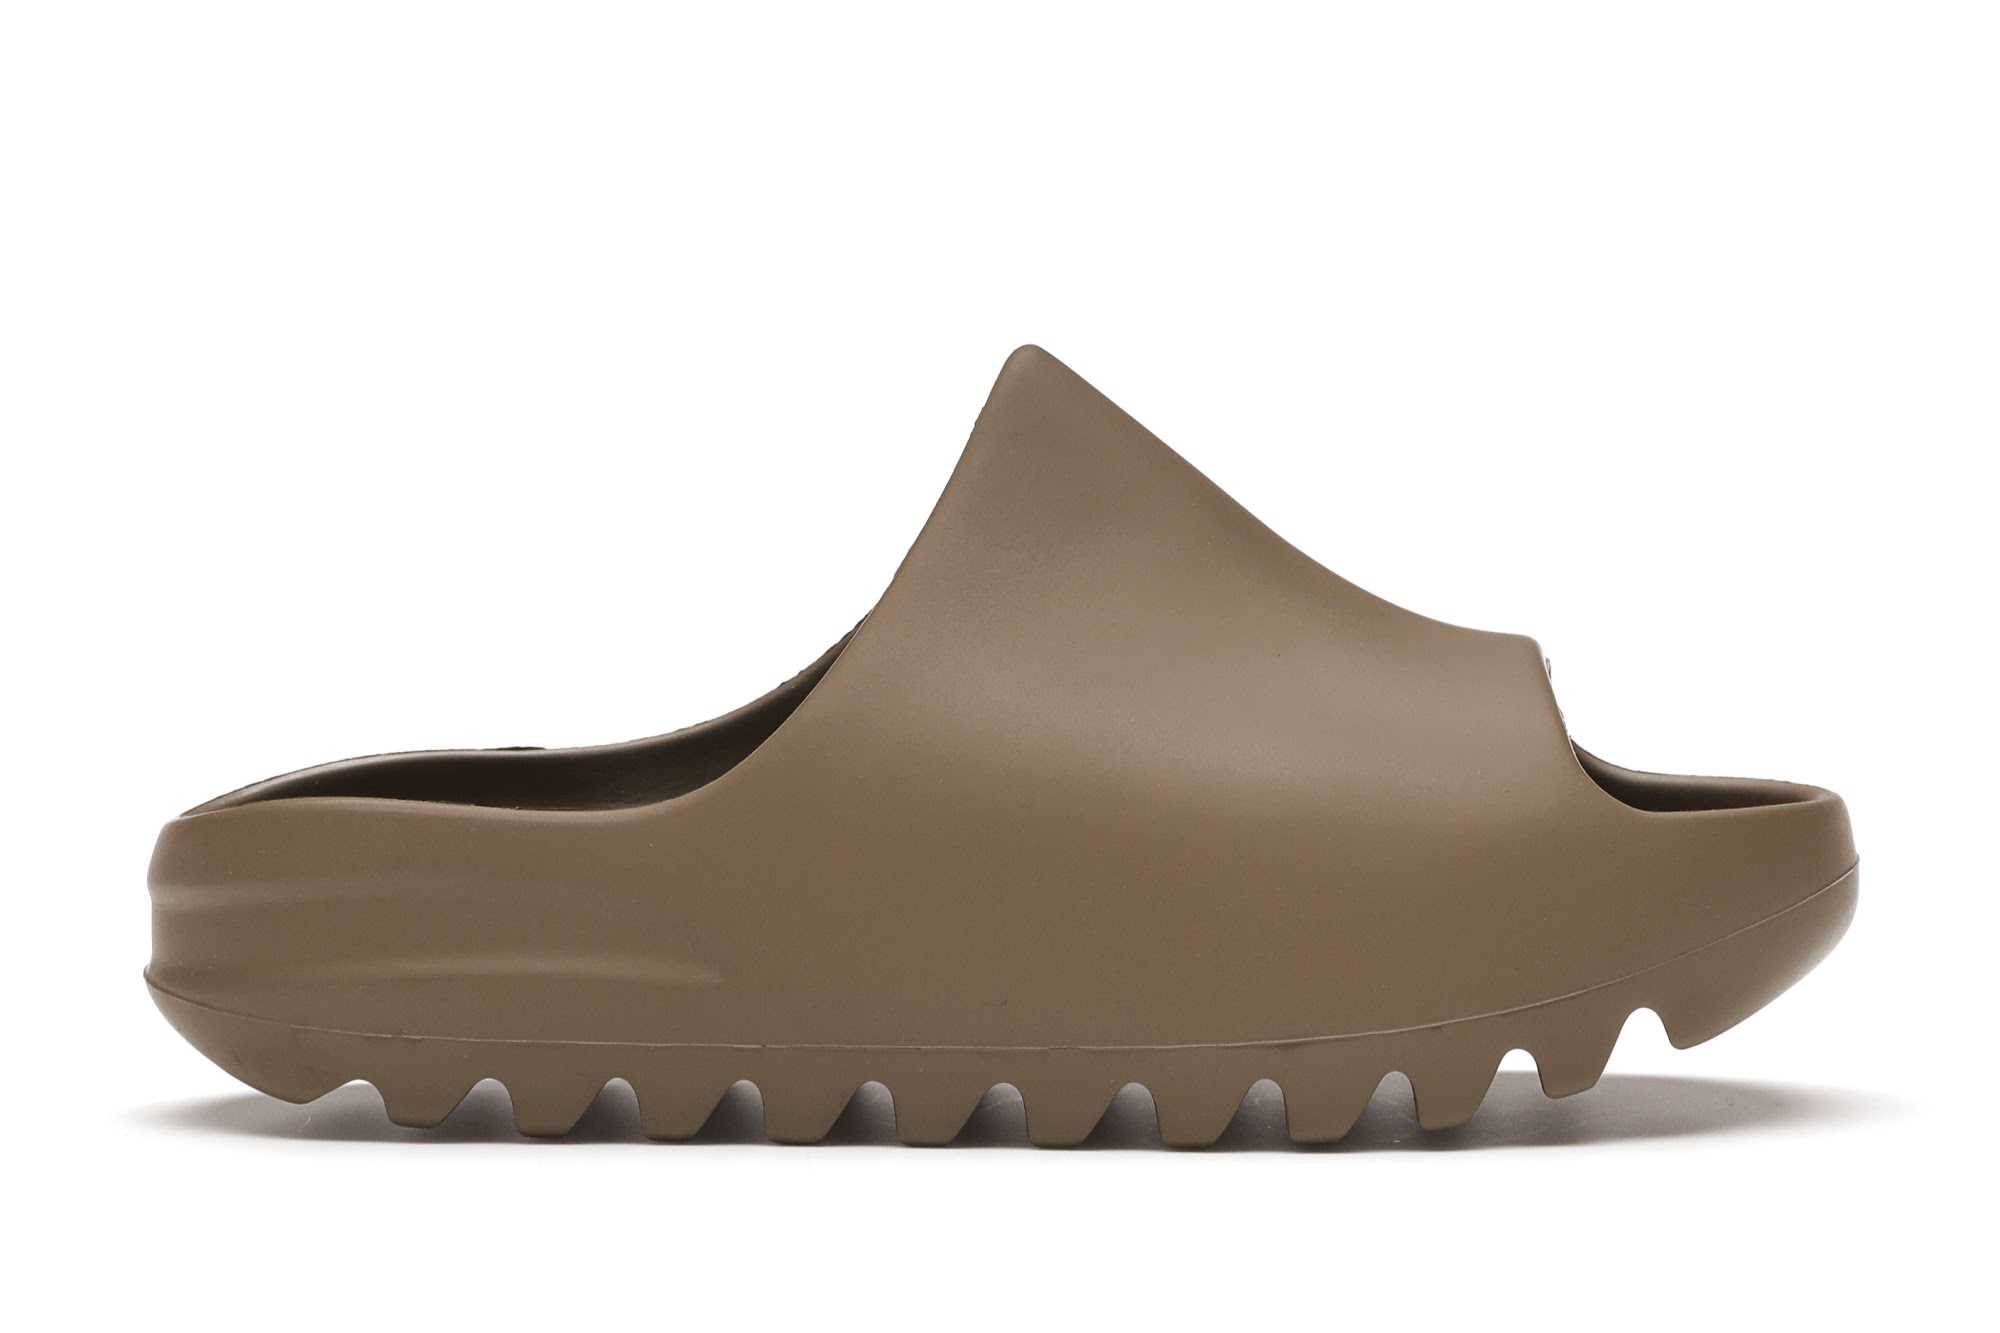 Adidas Yeezy Slides Shoes Earth Brown (Kids)